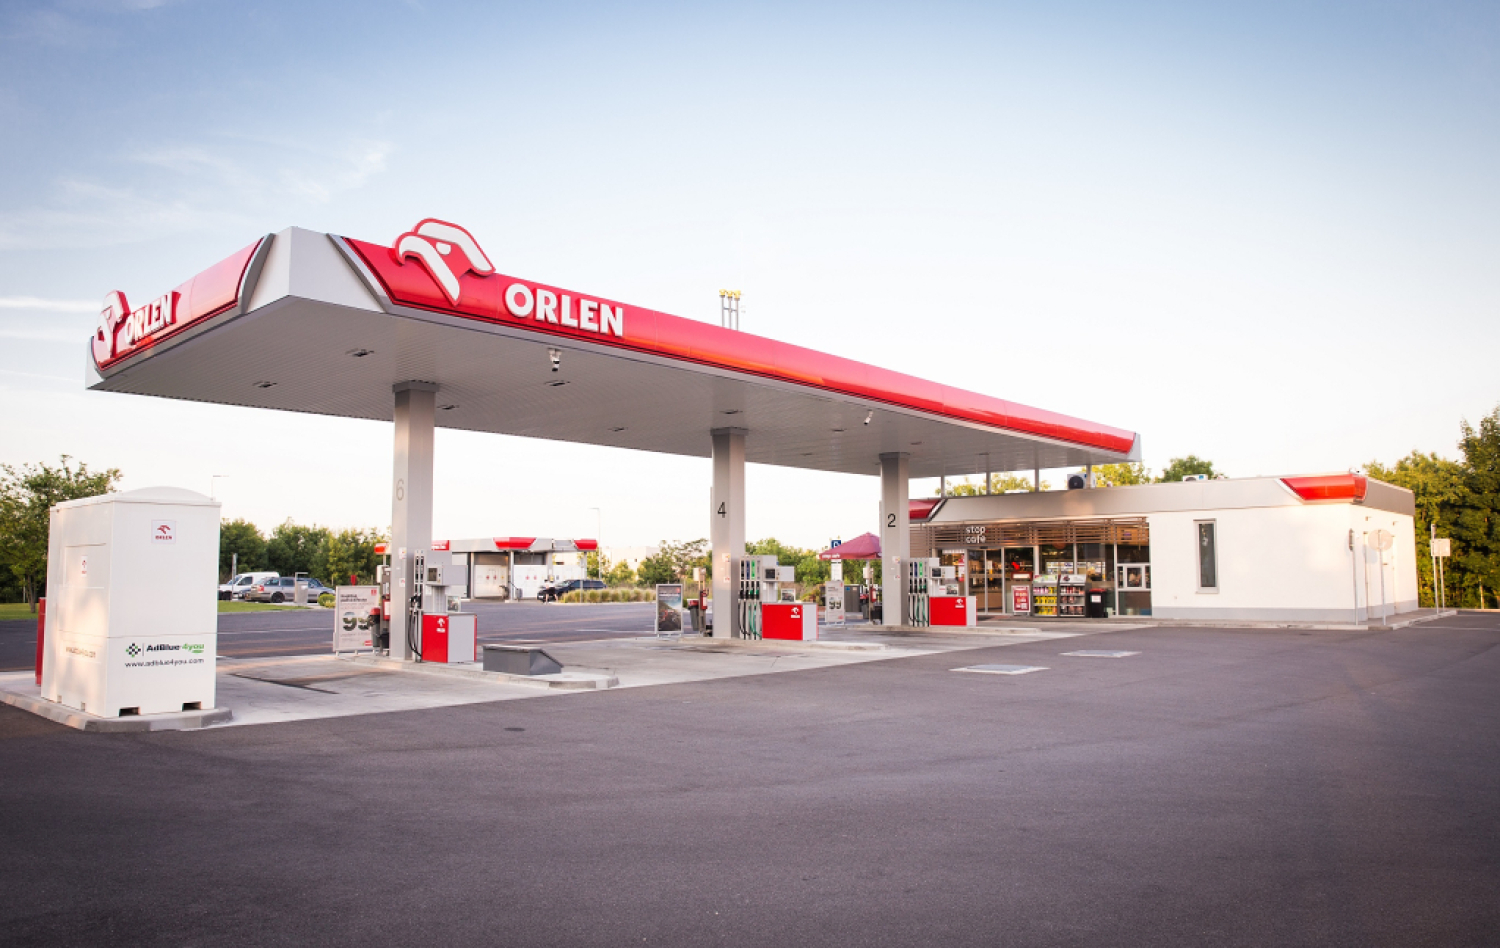 ORLEN has doubled the number of stations in Slovakia. Next year it will launch a mobile app and start building an electric vehicle infrastructure